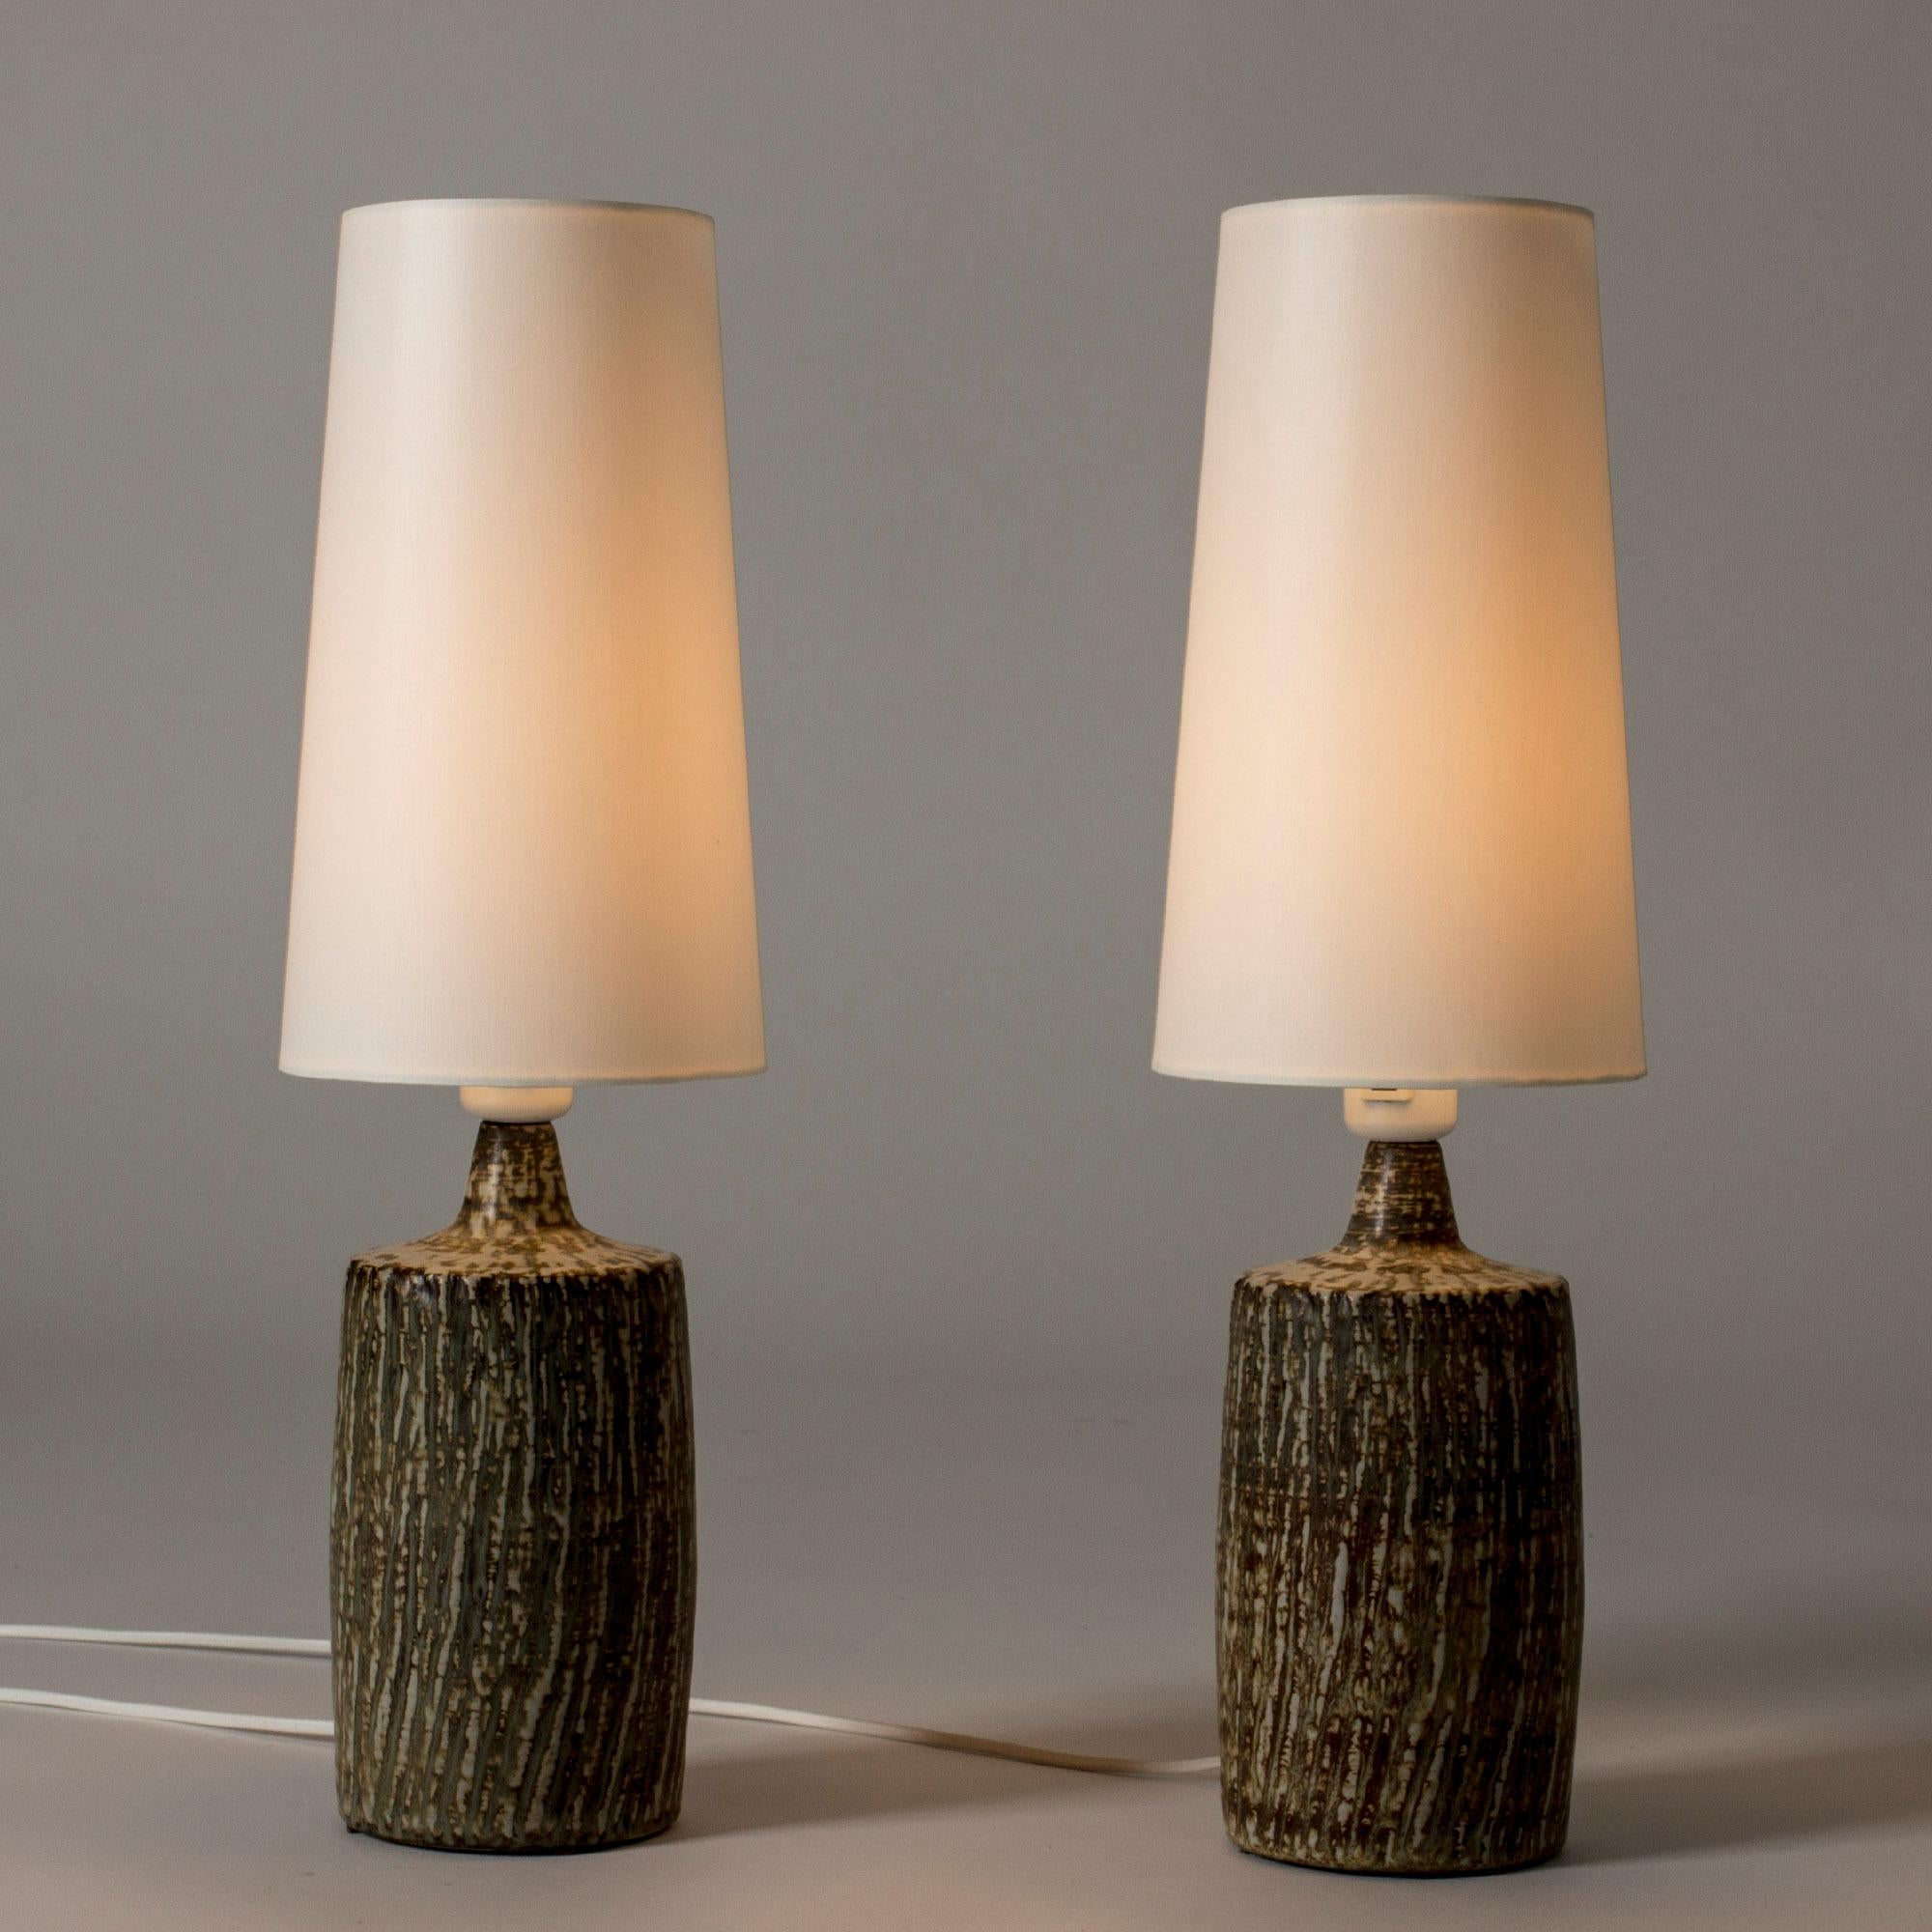 Scandinavian Modern Pair of Table Lamps by Gunnar Nylund, Sweden, 1960s